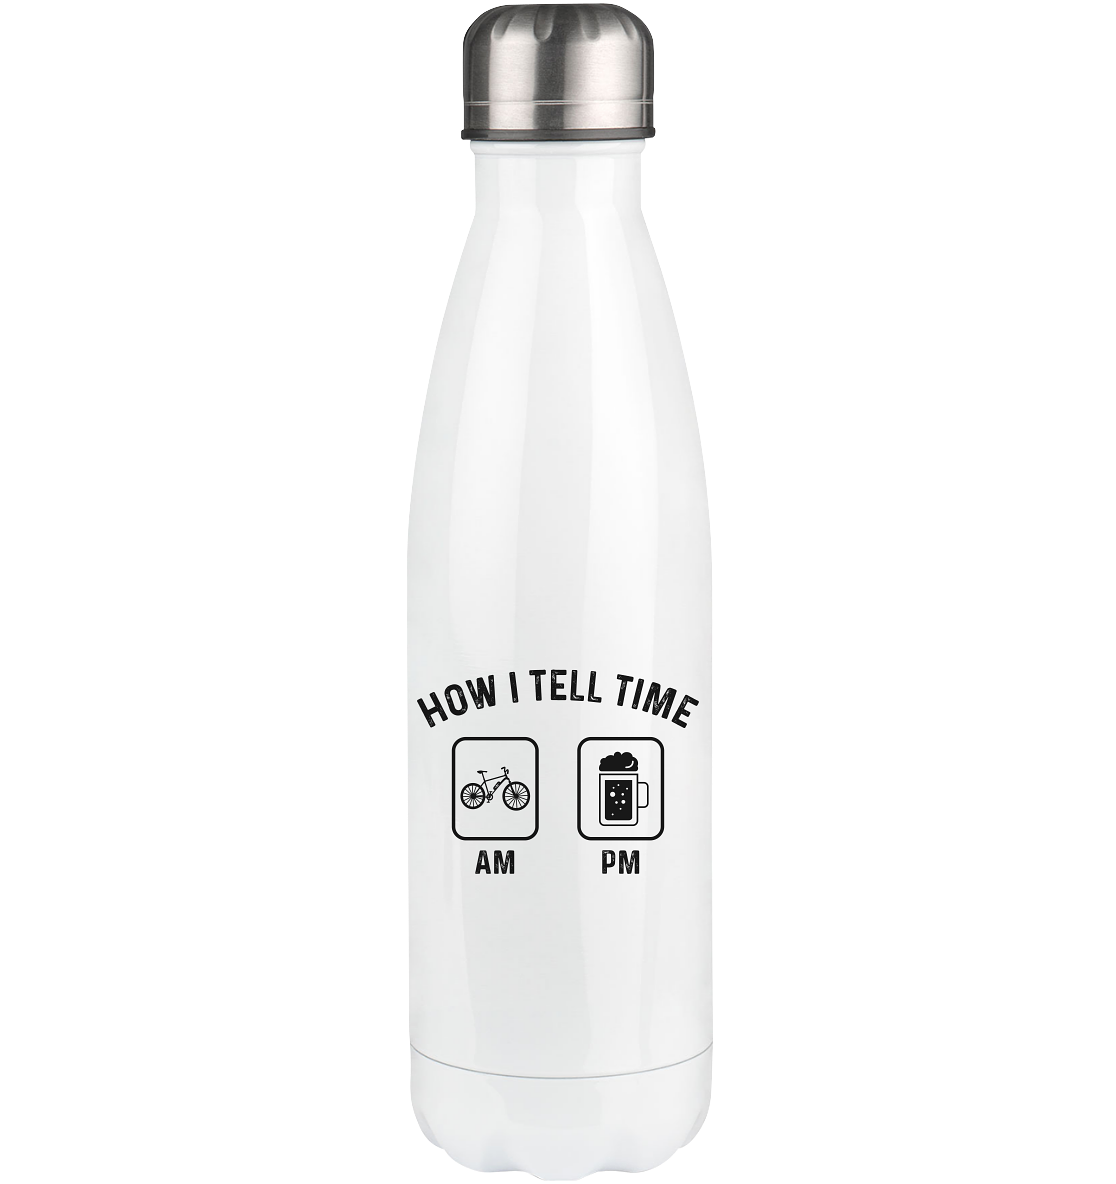 How I Tell Time Am Pm - Edelstahl Thermosflasche e-bike 500ml